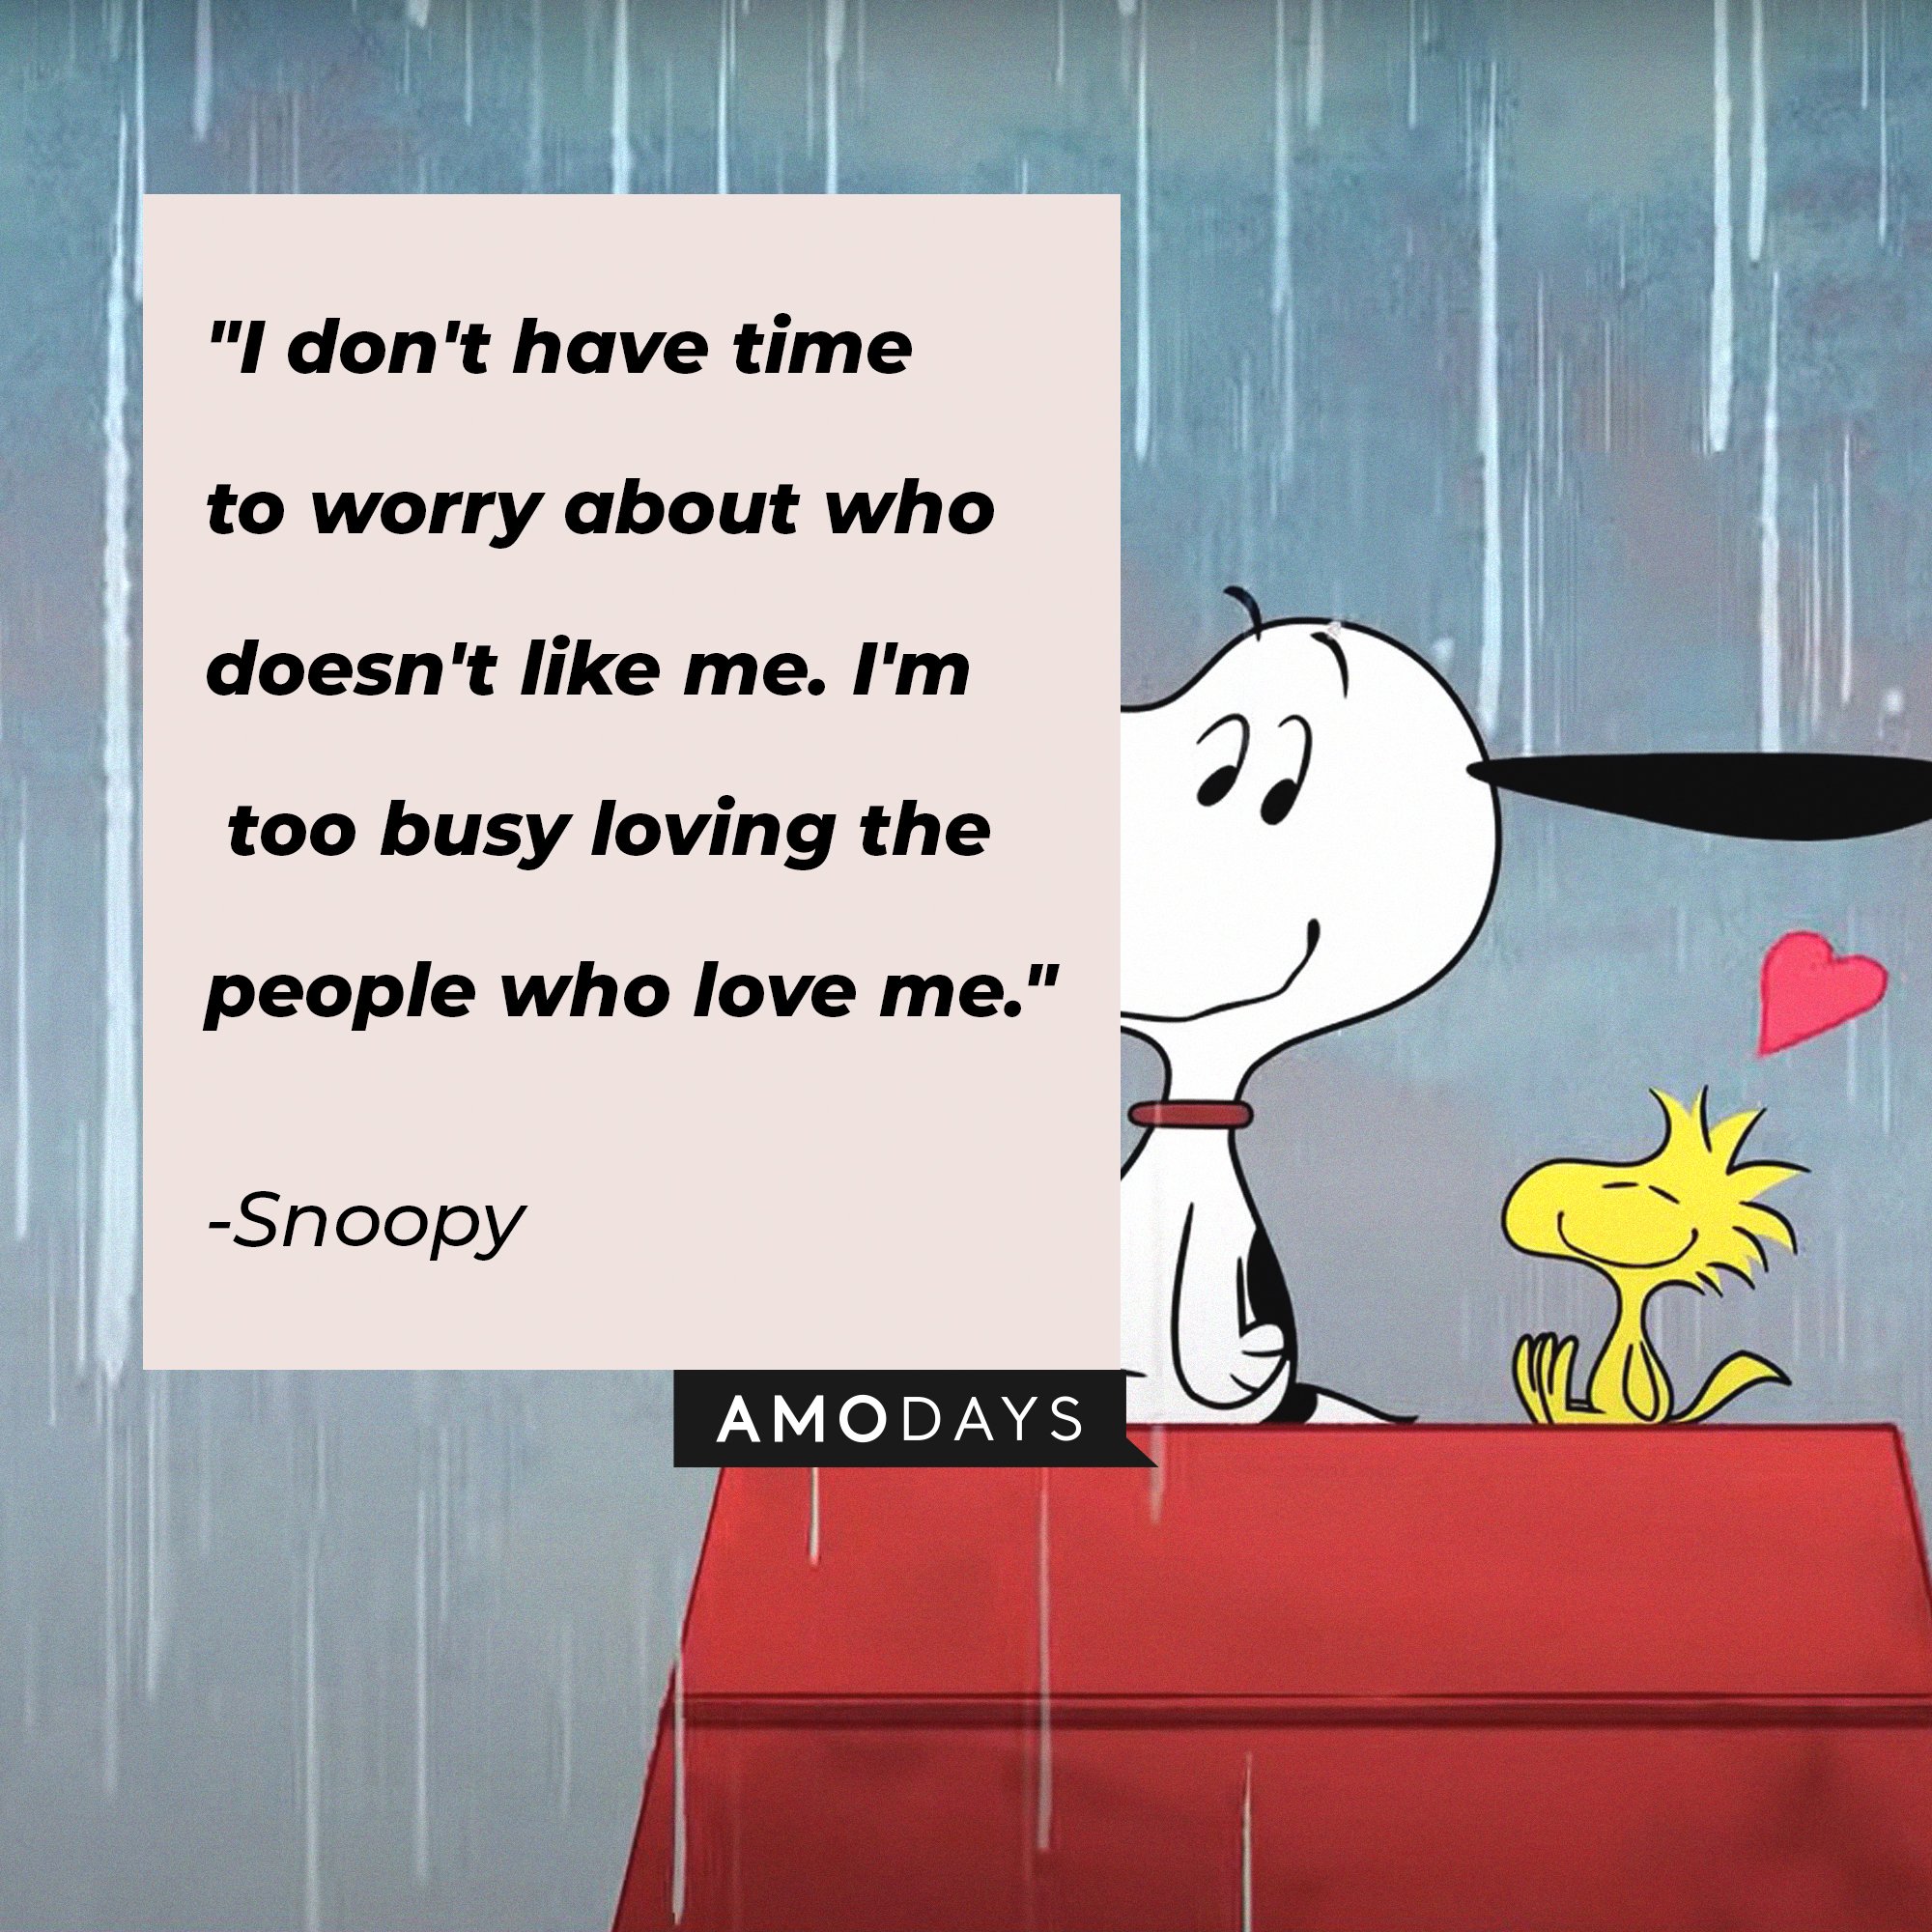 Snoopy’s quote: "I don't have time to worry about who doesn't like me. I'm too busy loving the people who love me." | Image: AmoDays 